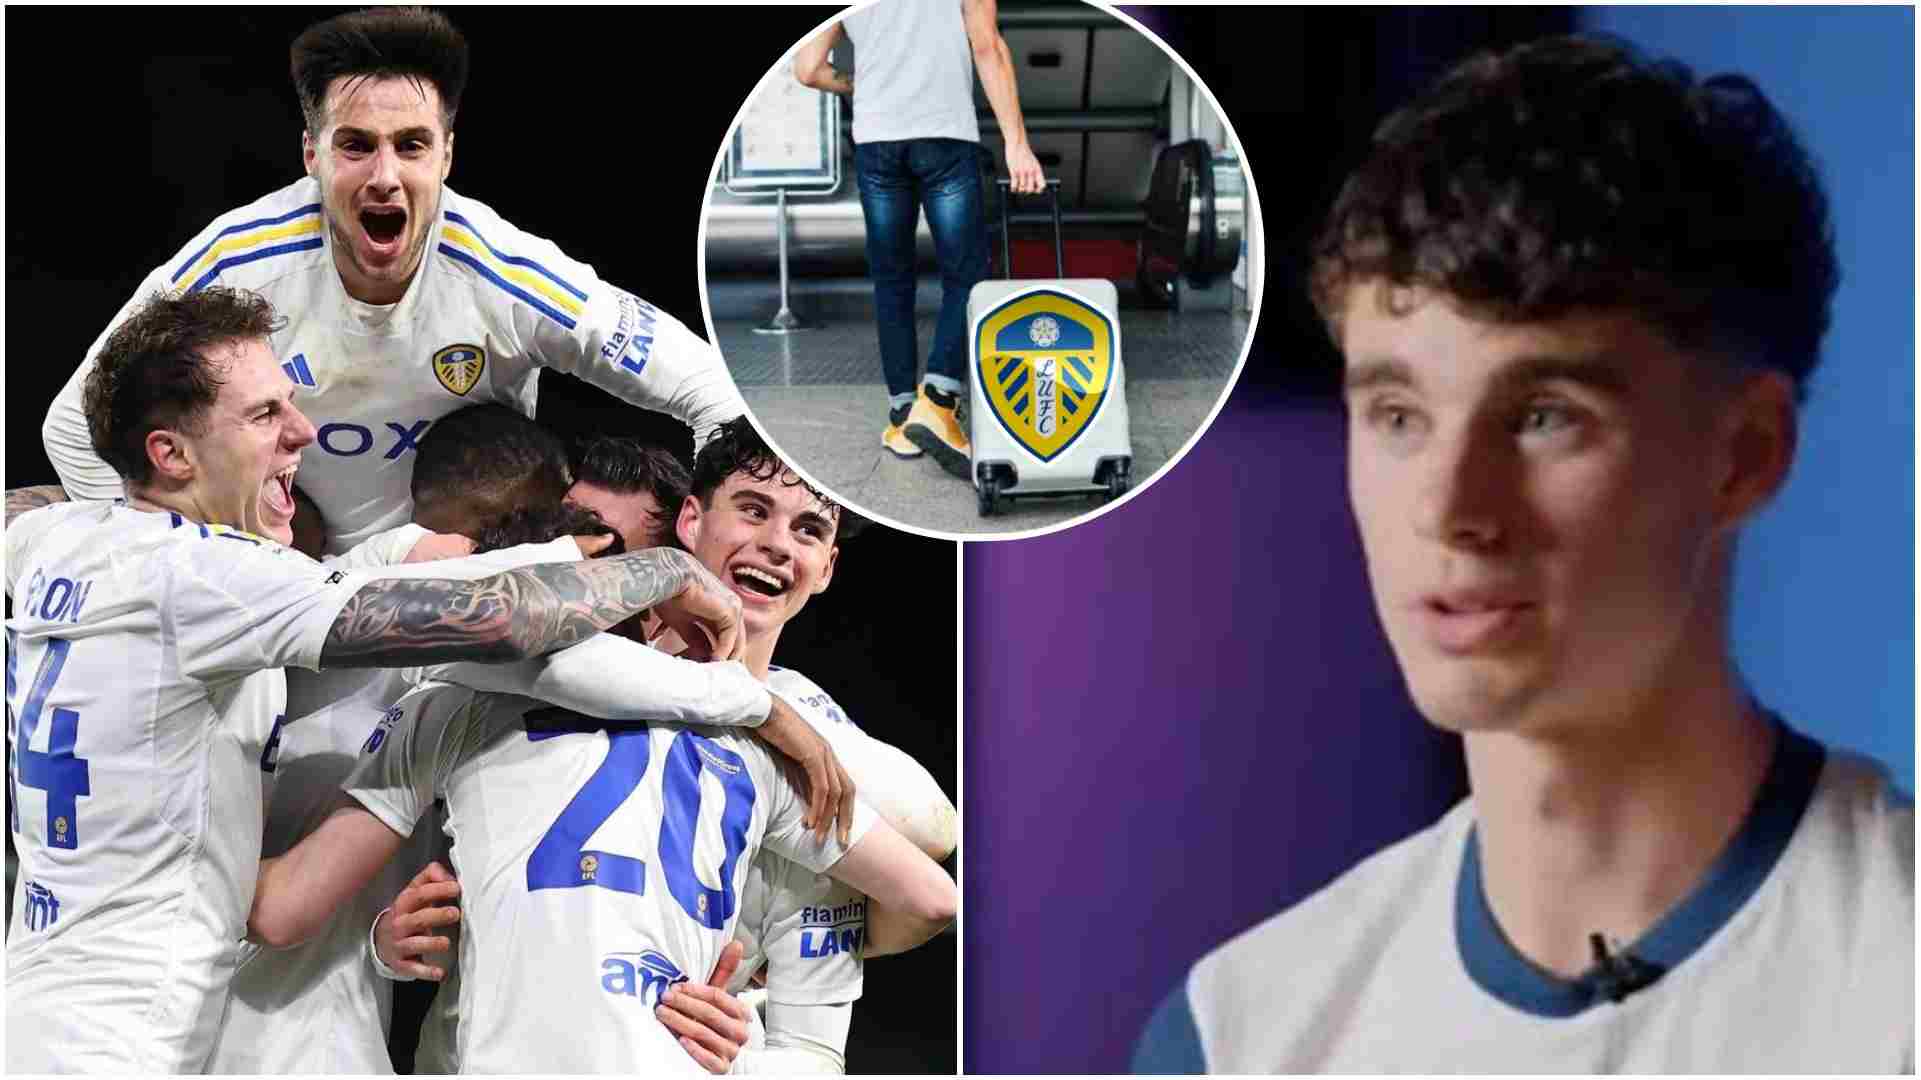 Archie Gray has not forgotten about Leeds United as 18-year old sends ‘Beautiful farewell message’ to Top-class 24-year old star that has followed in his footsteps to LEAVE Elland Road Today